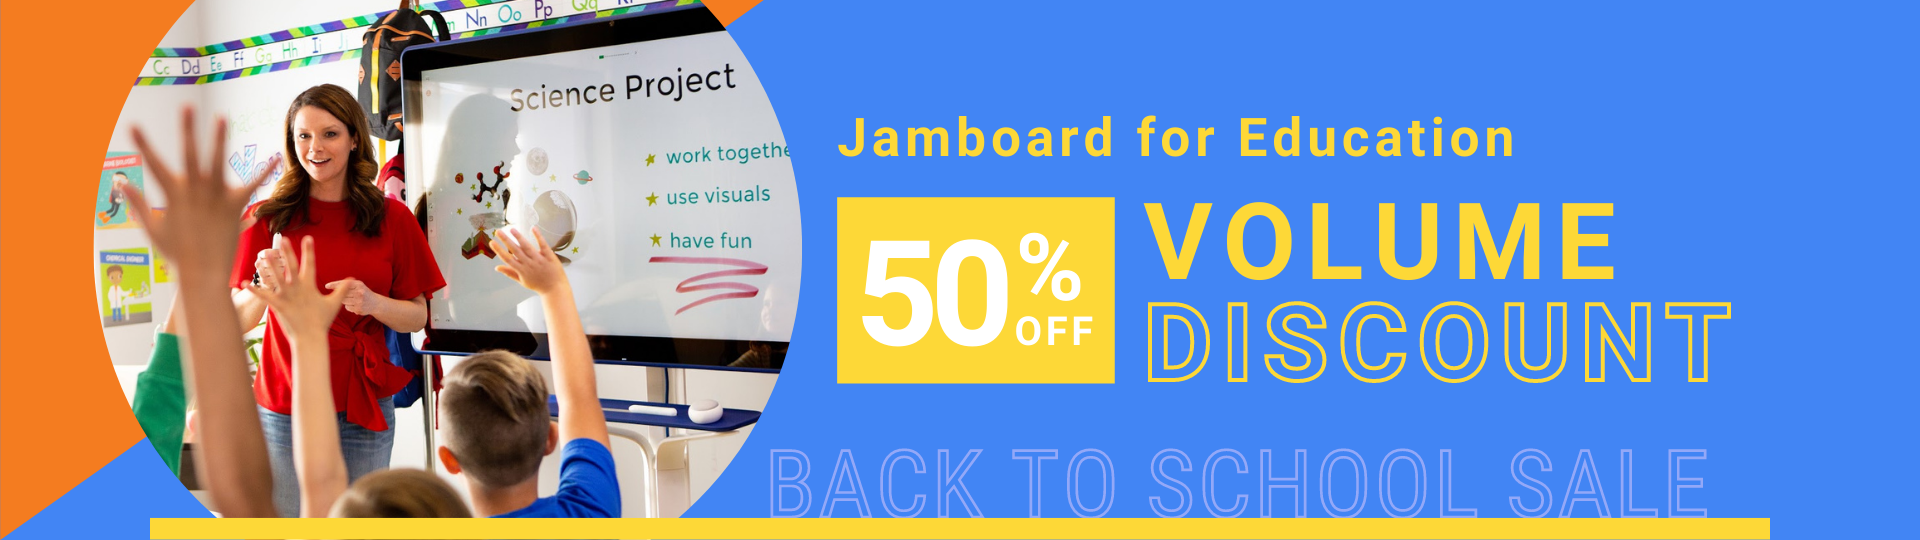 Jamboard for education promotion 